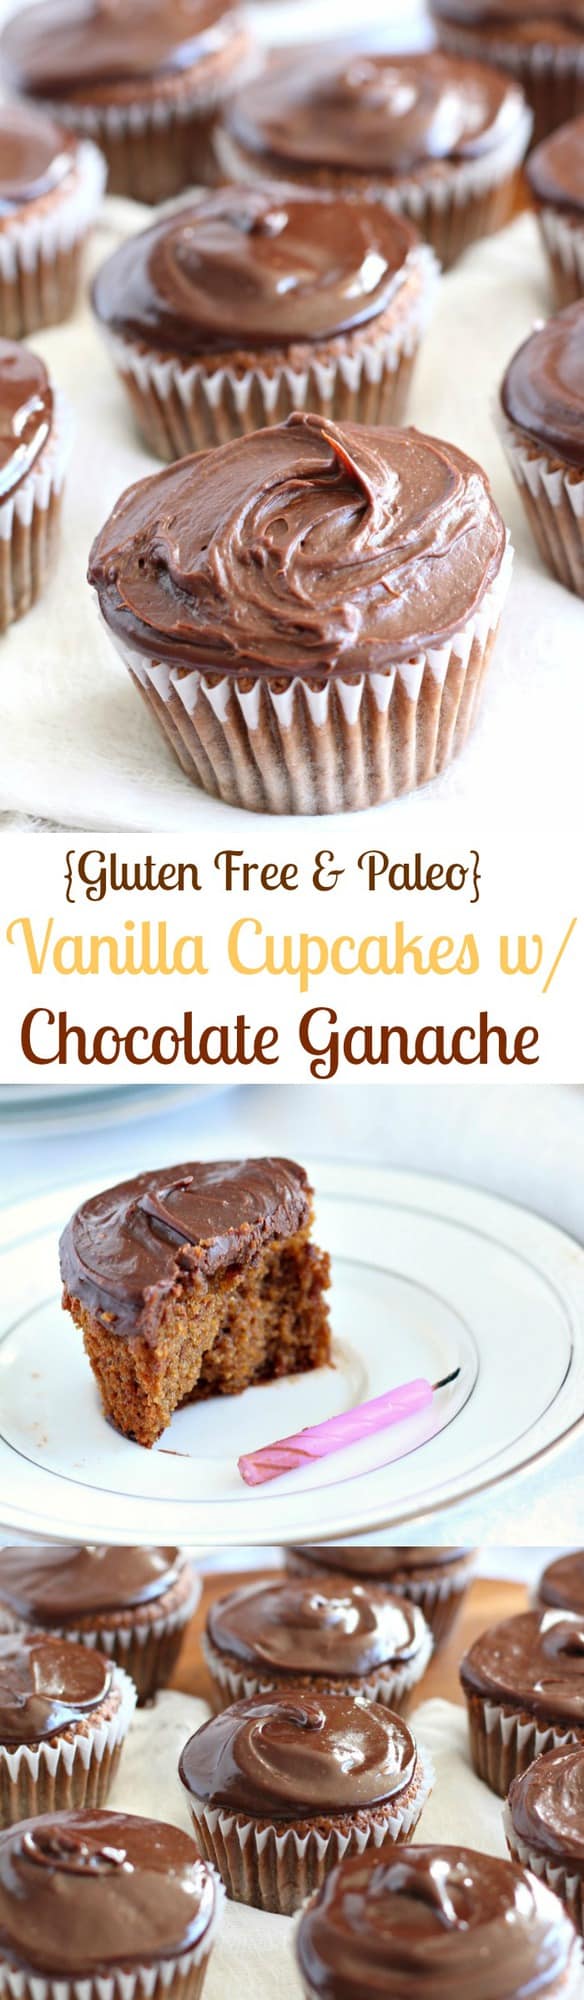 Vanilla Cupcakes with Chocolate Ganache icing that are perfectly moist, sweet, rich, and decadent! They're Gluten free, grain free, dairy free, and Paleo | paleorunningmomma.com